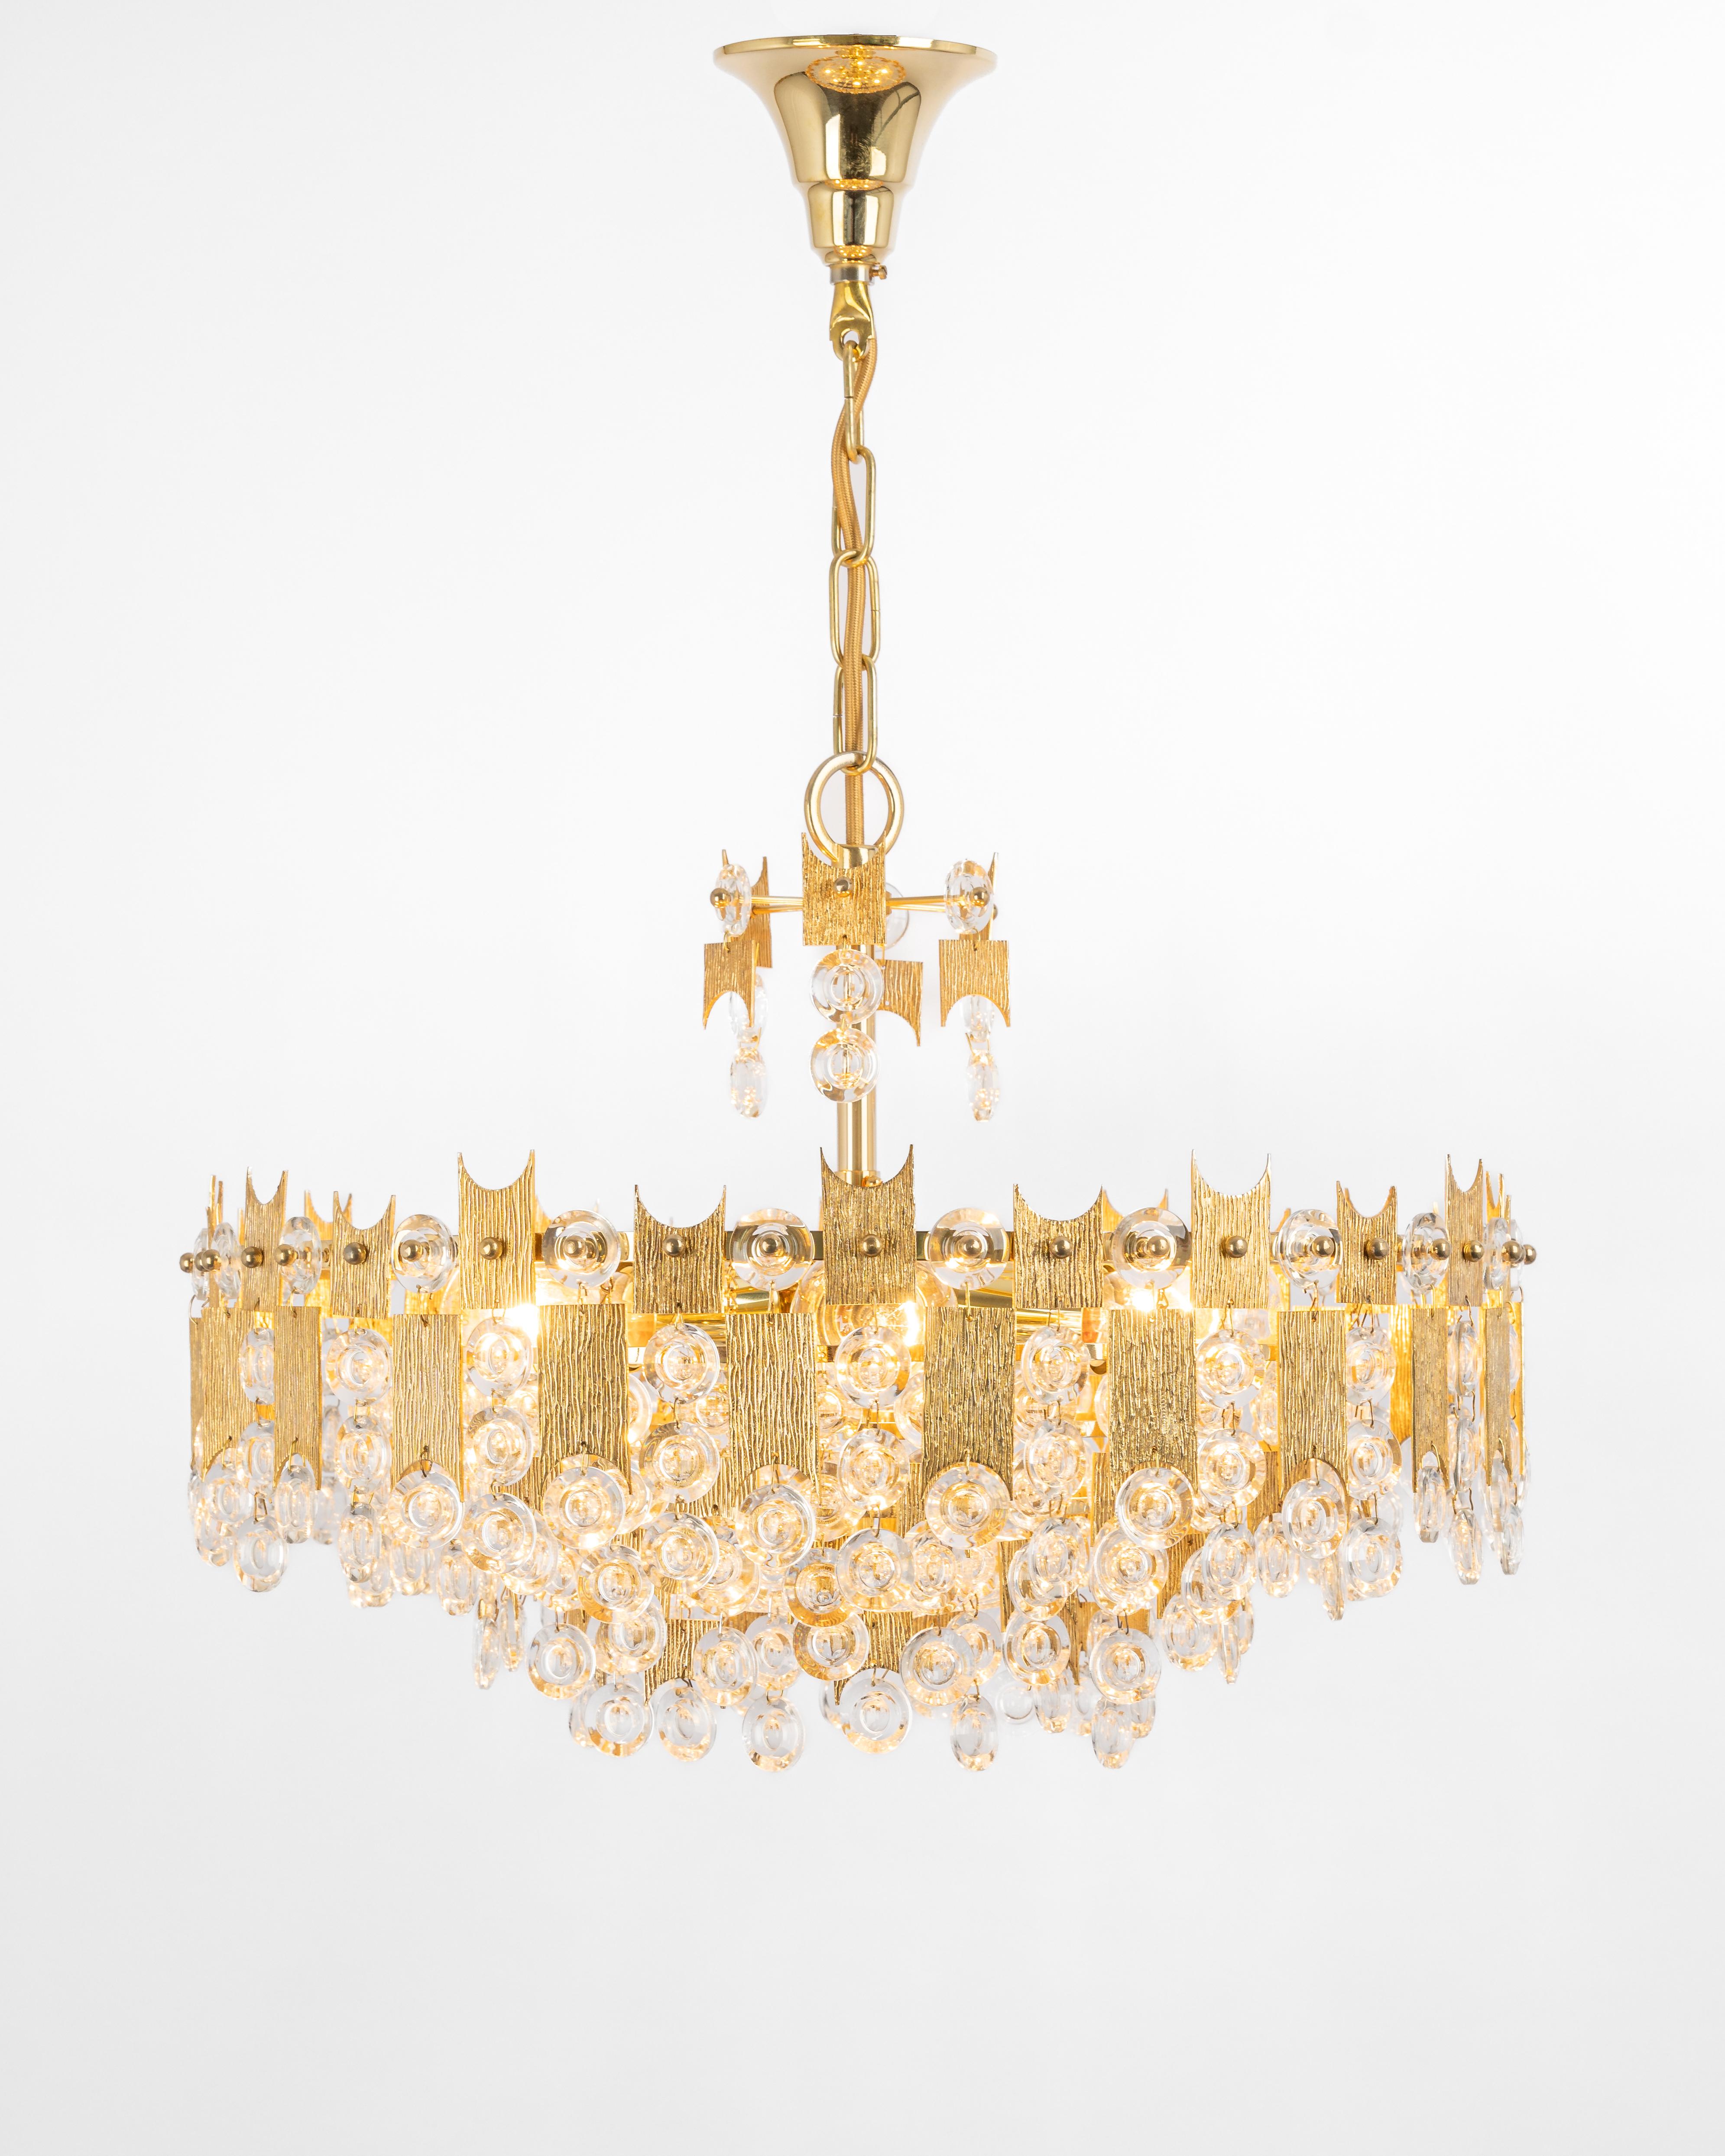 Impressive Large Gilt Brass and Crystal Glass Chandelier by Palwa Germany, 1960s For Sale 3